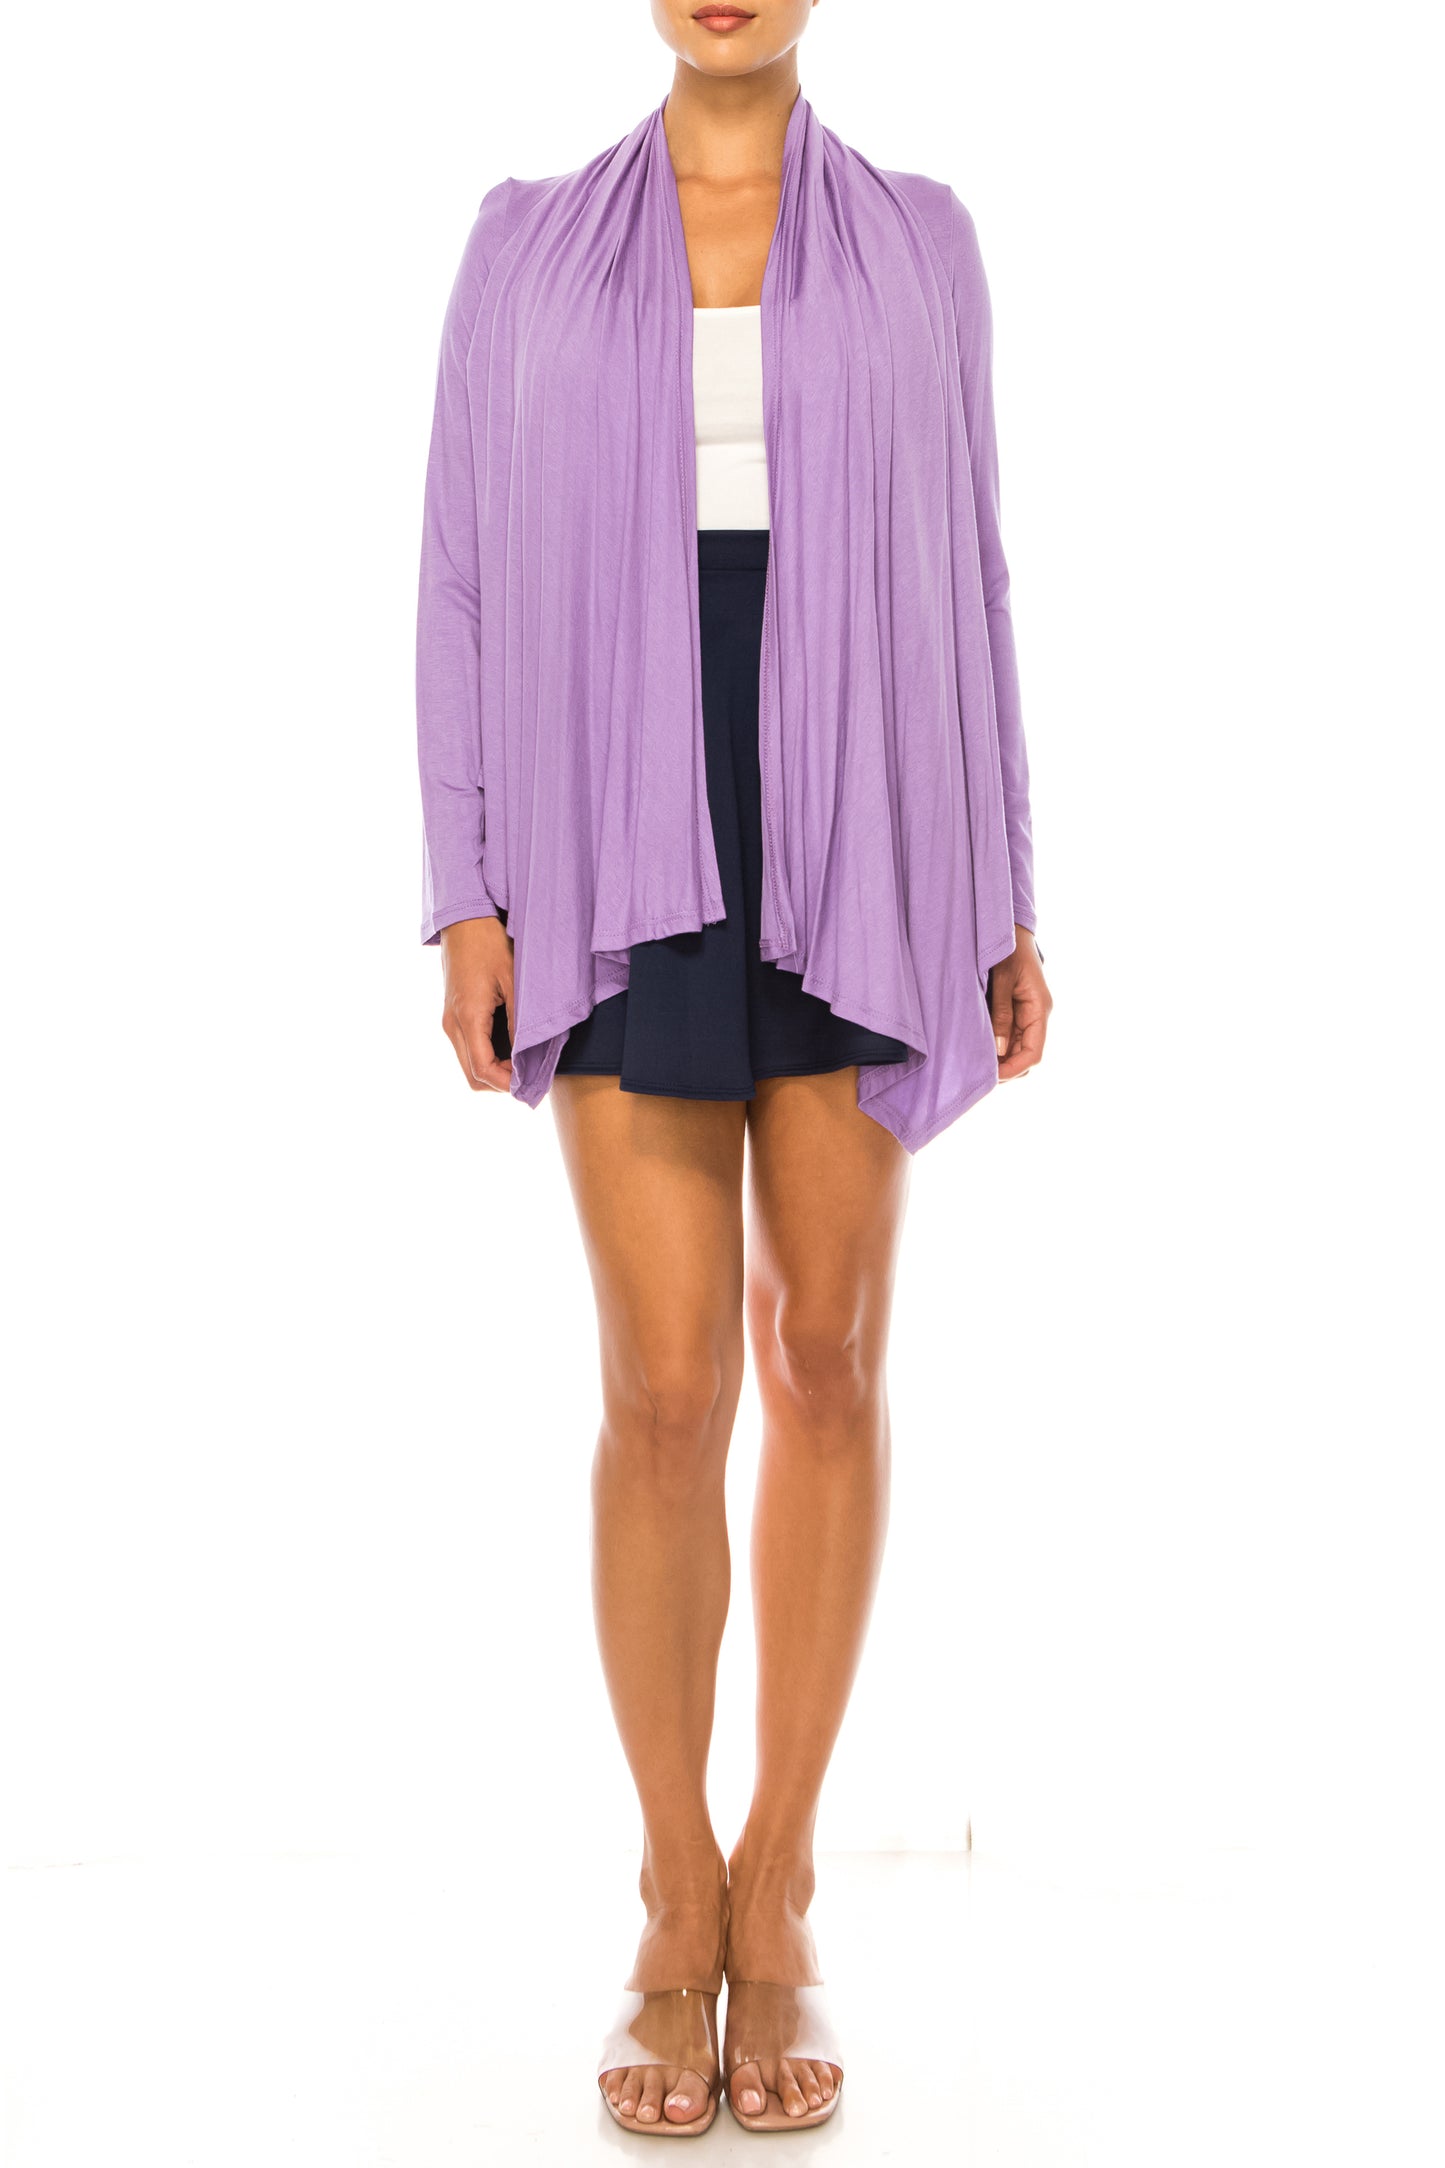 Women's Asymmetric Hem Cardigan with Draped Neck and Open Front